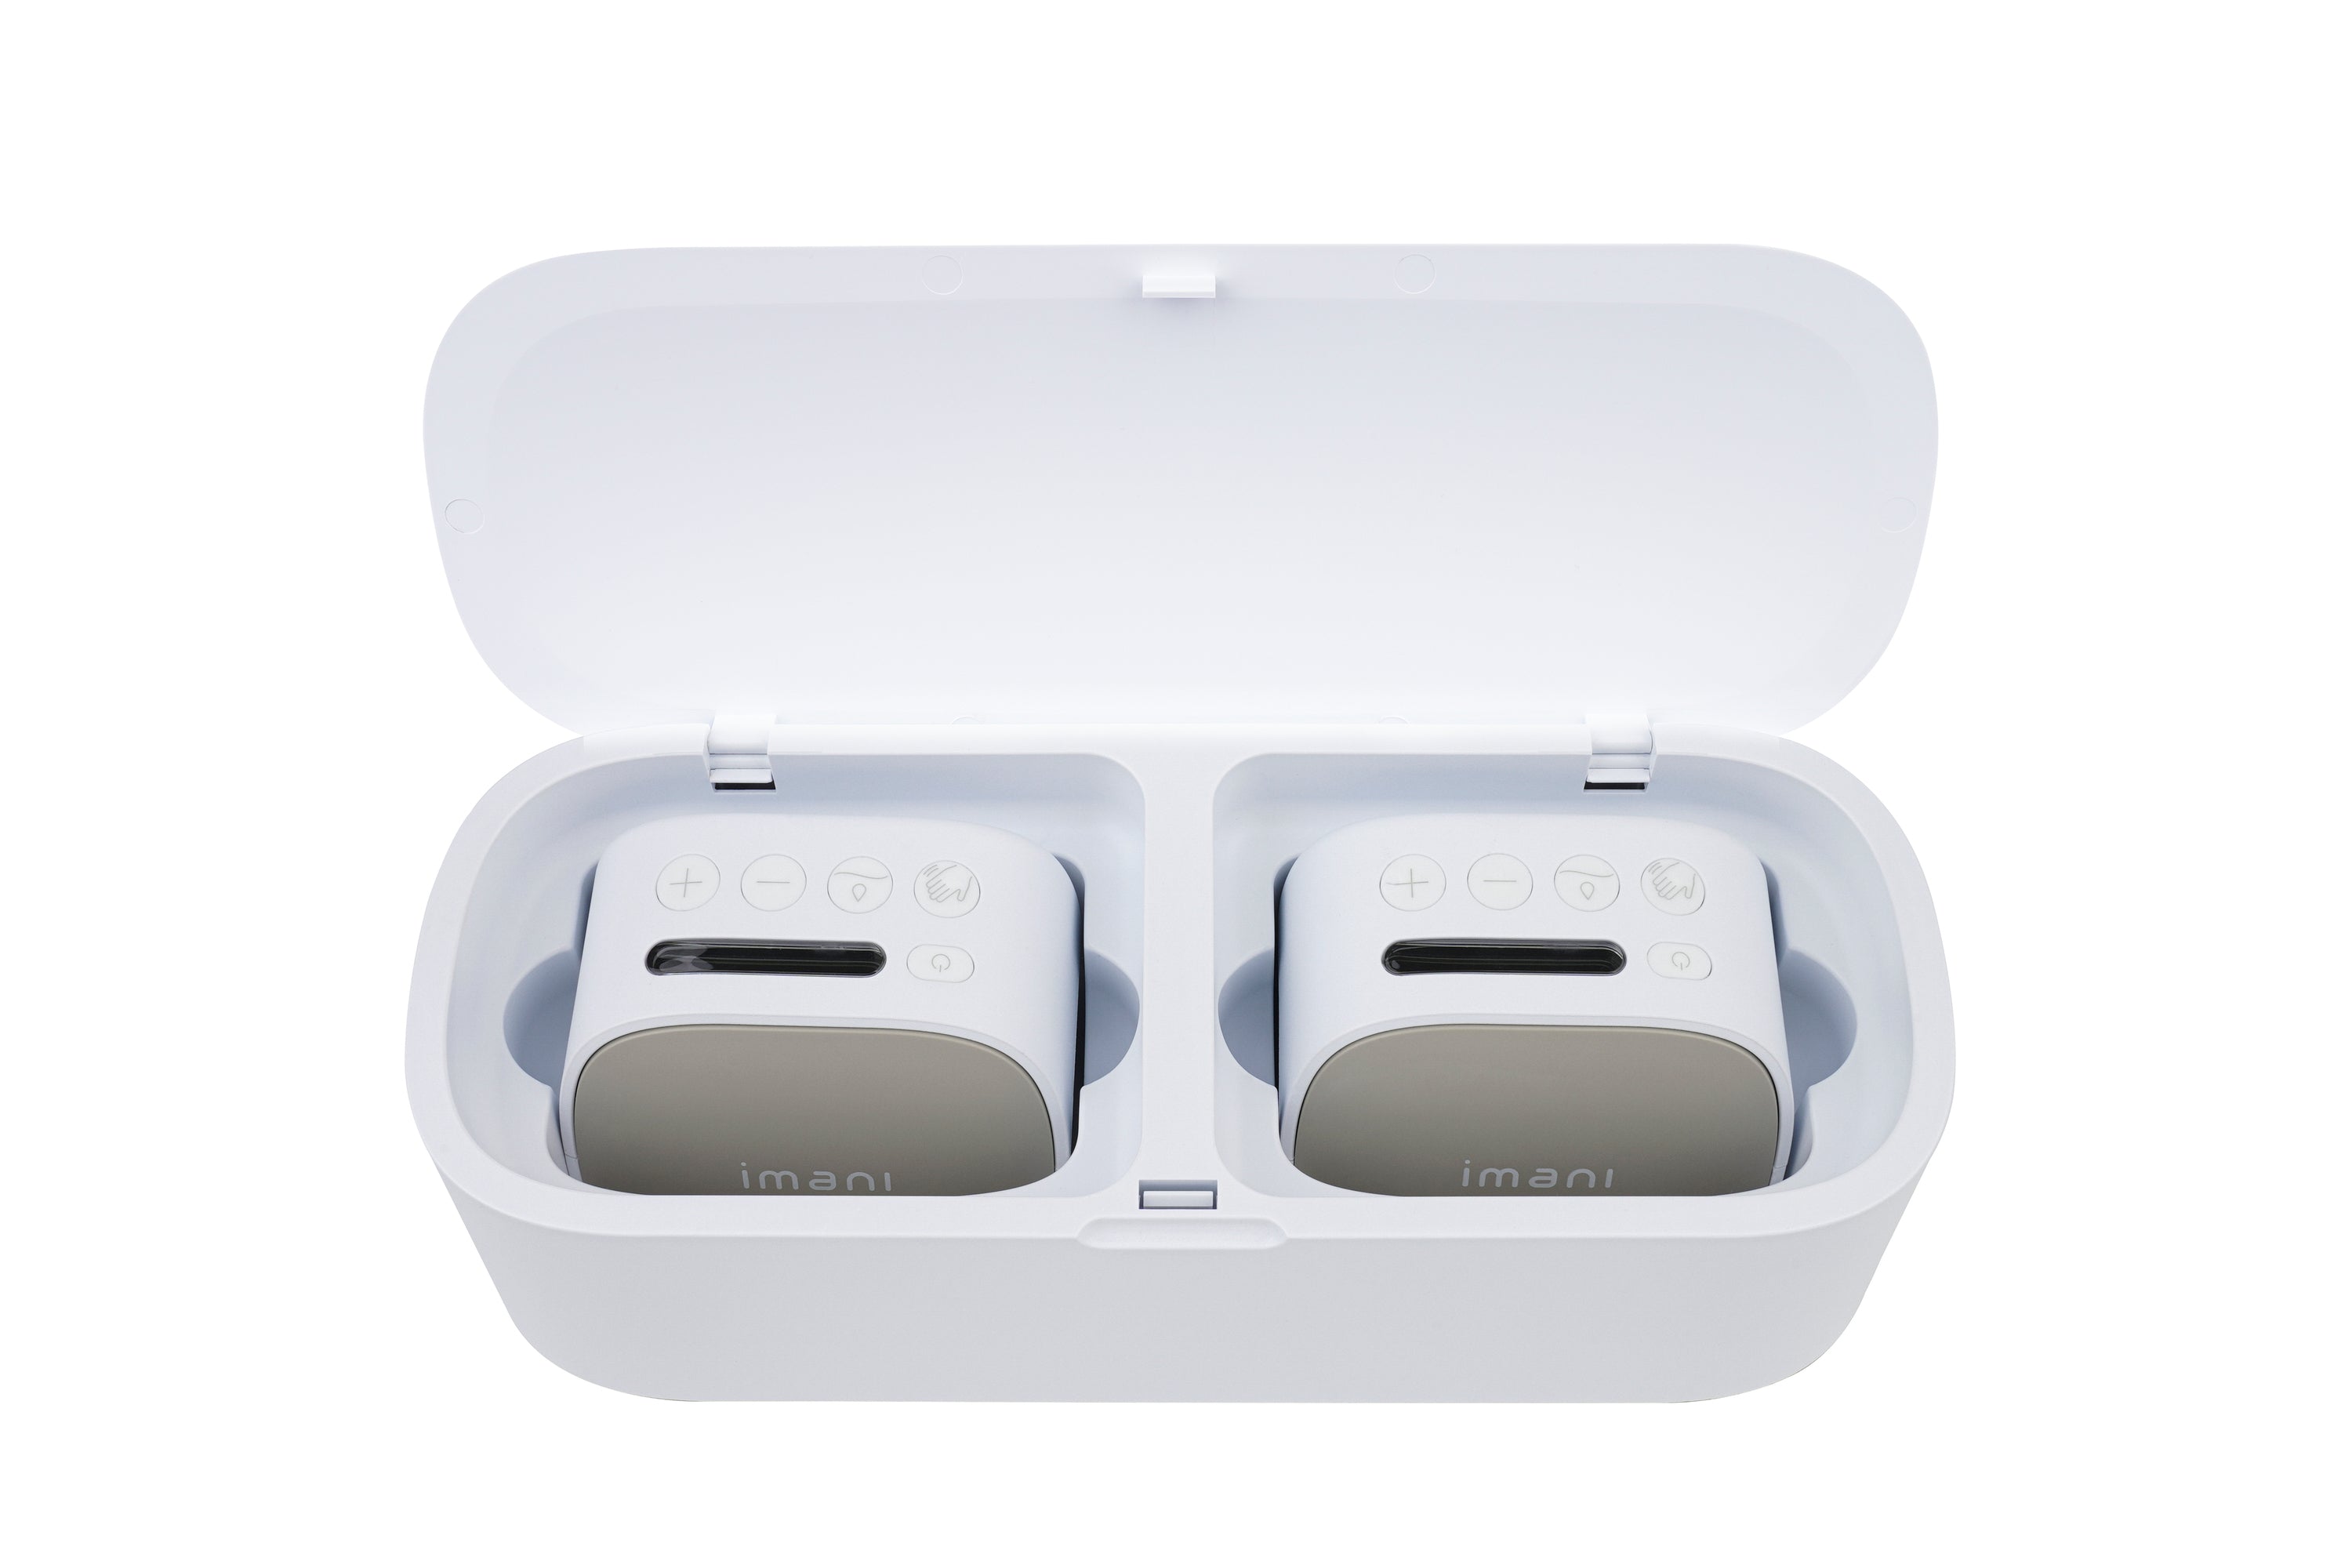 imani Dual Charging Dock (ONLY for i2+)